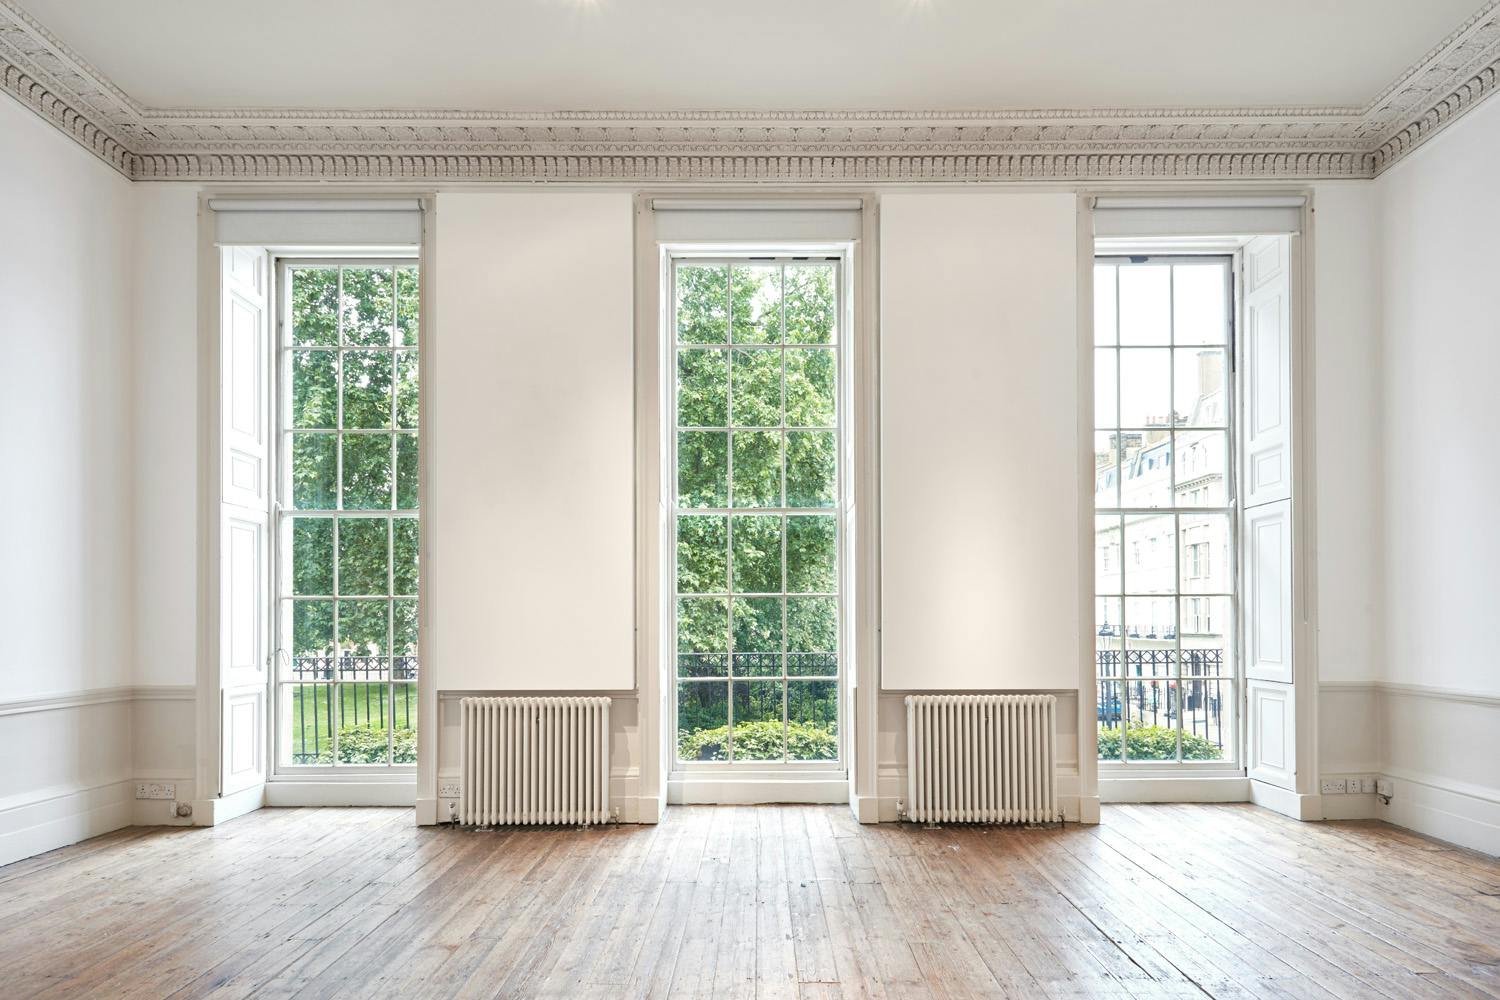 Galleries for Hire - Fitzroy Square House